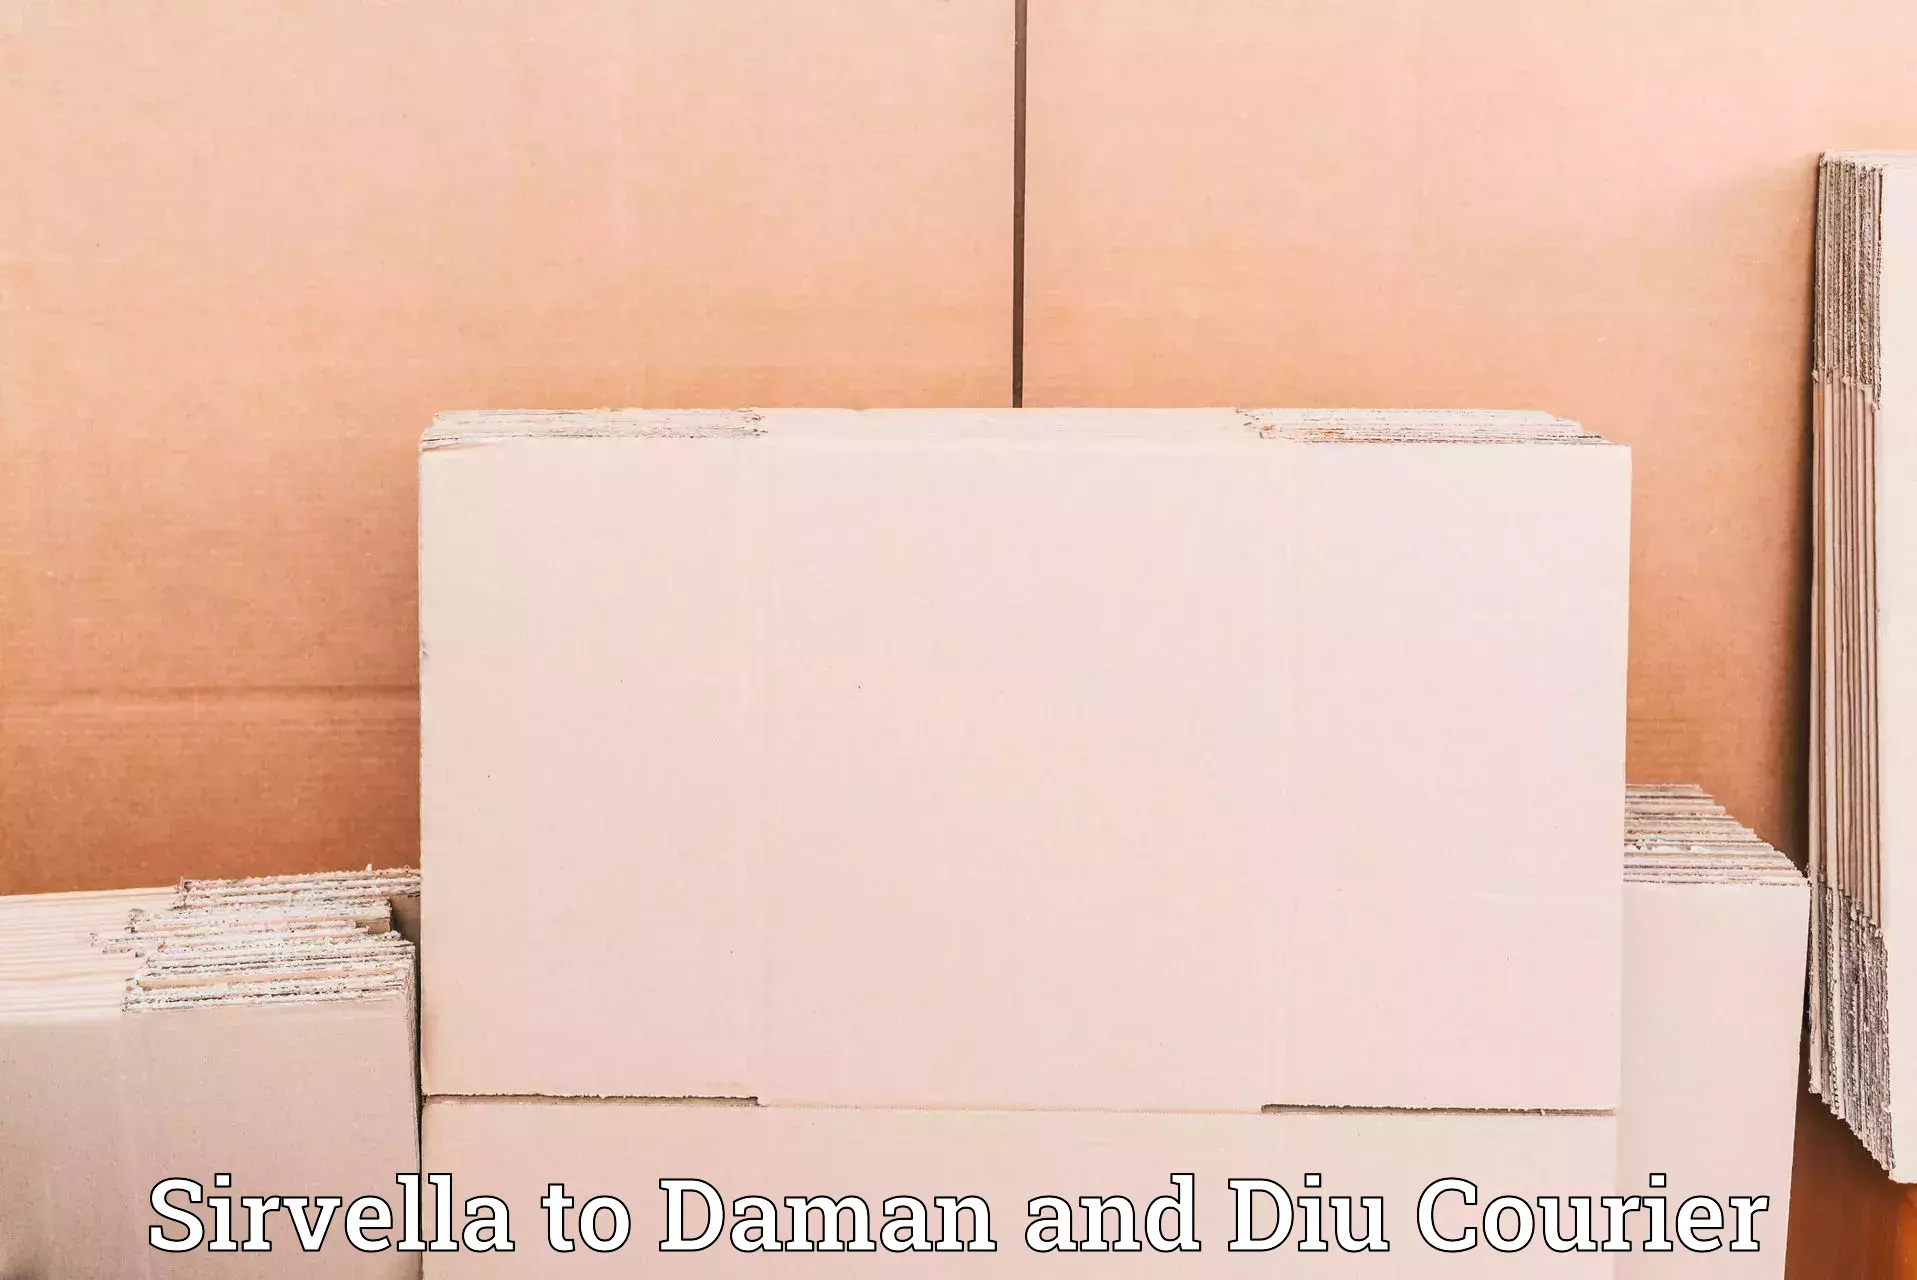 Local courier options in Sirvella to Daman and Diu